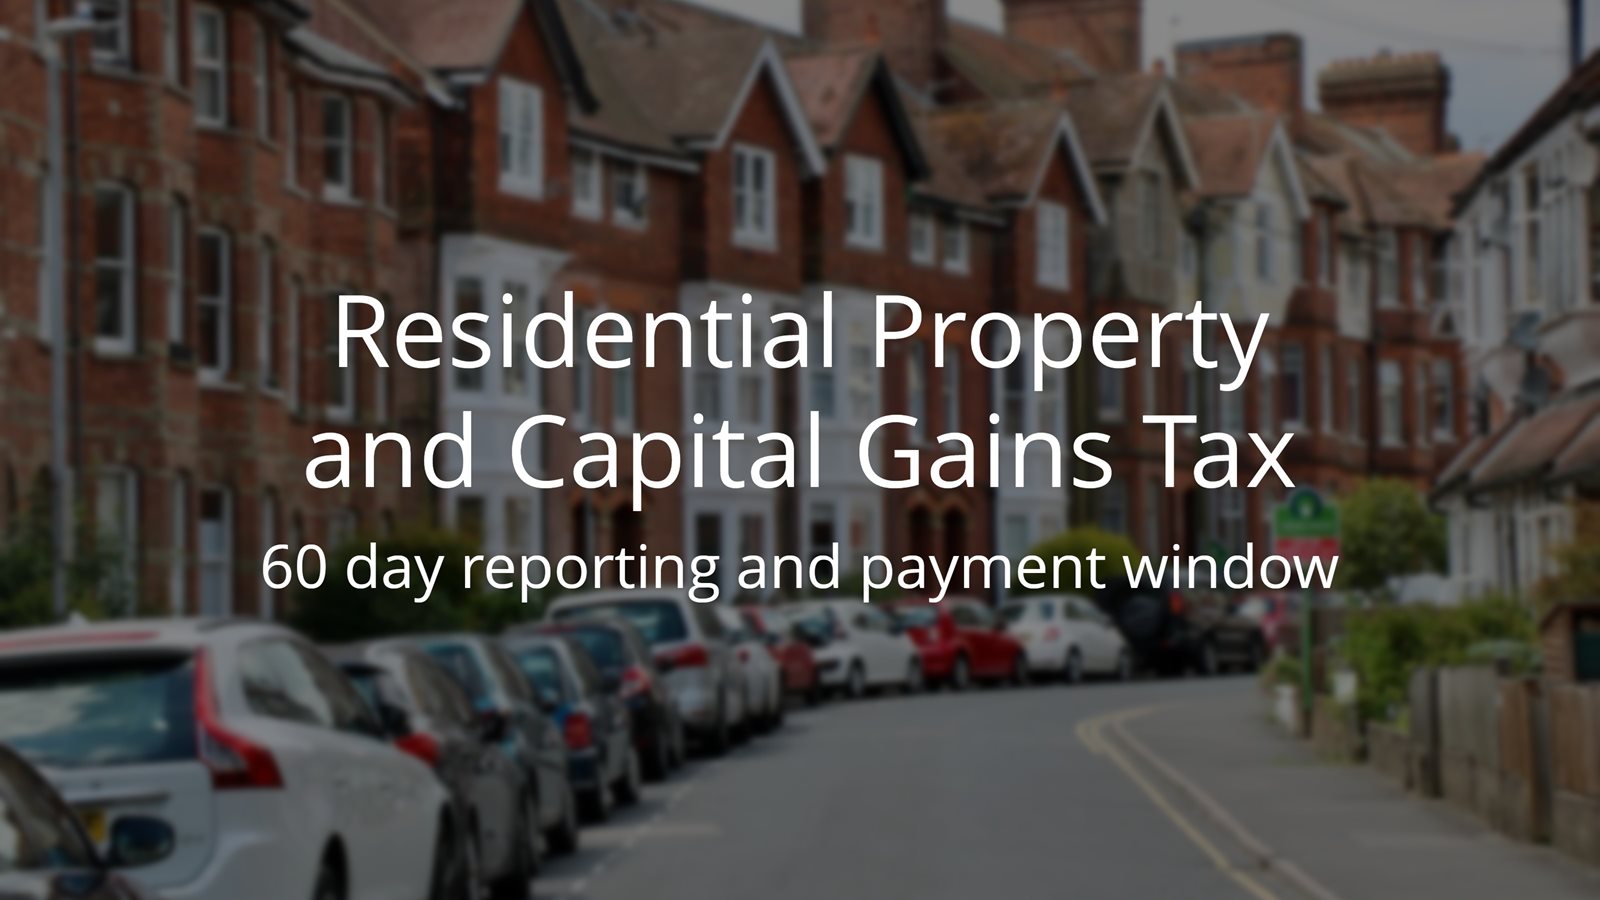 UPDATE: Residential Property and Capital Gains Tax